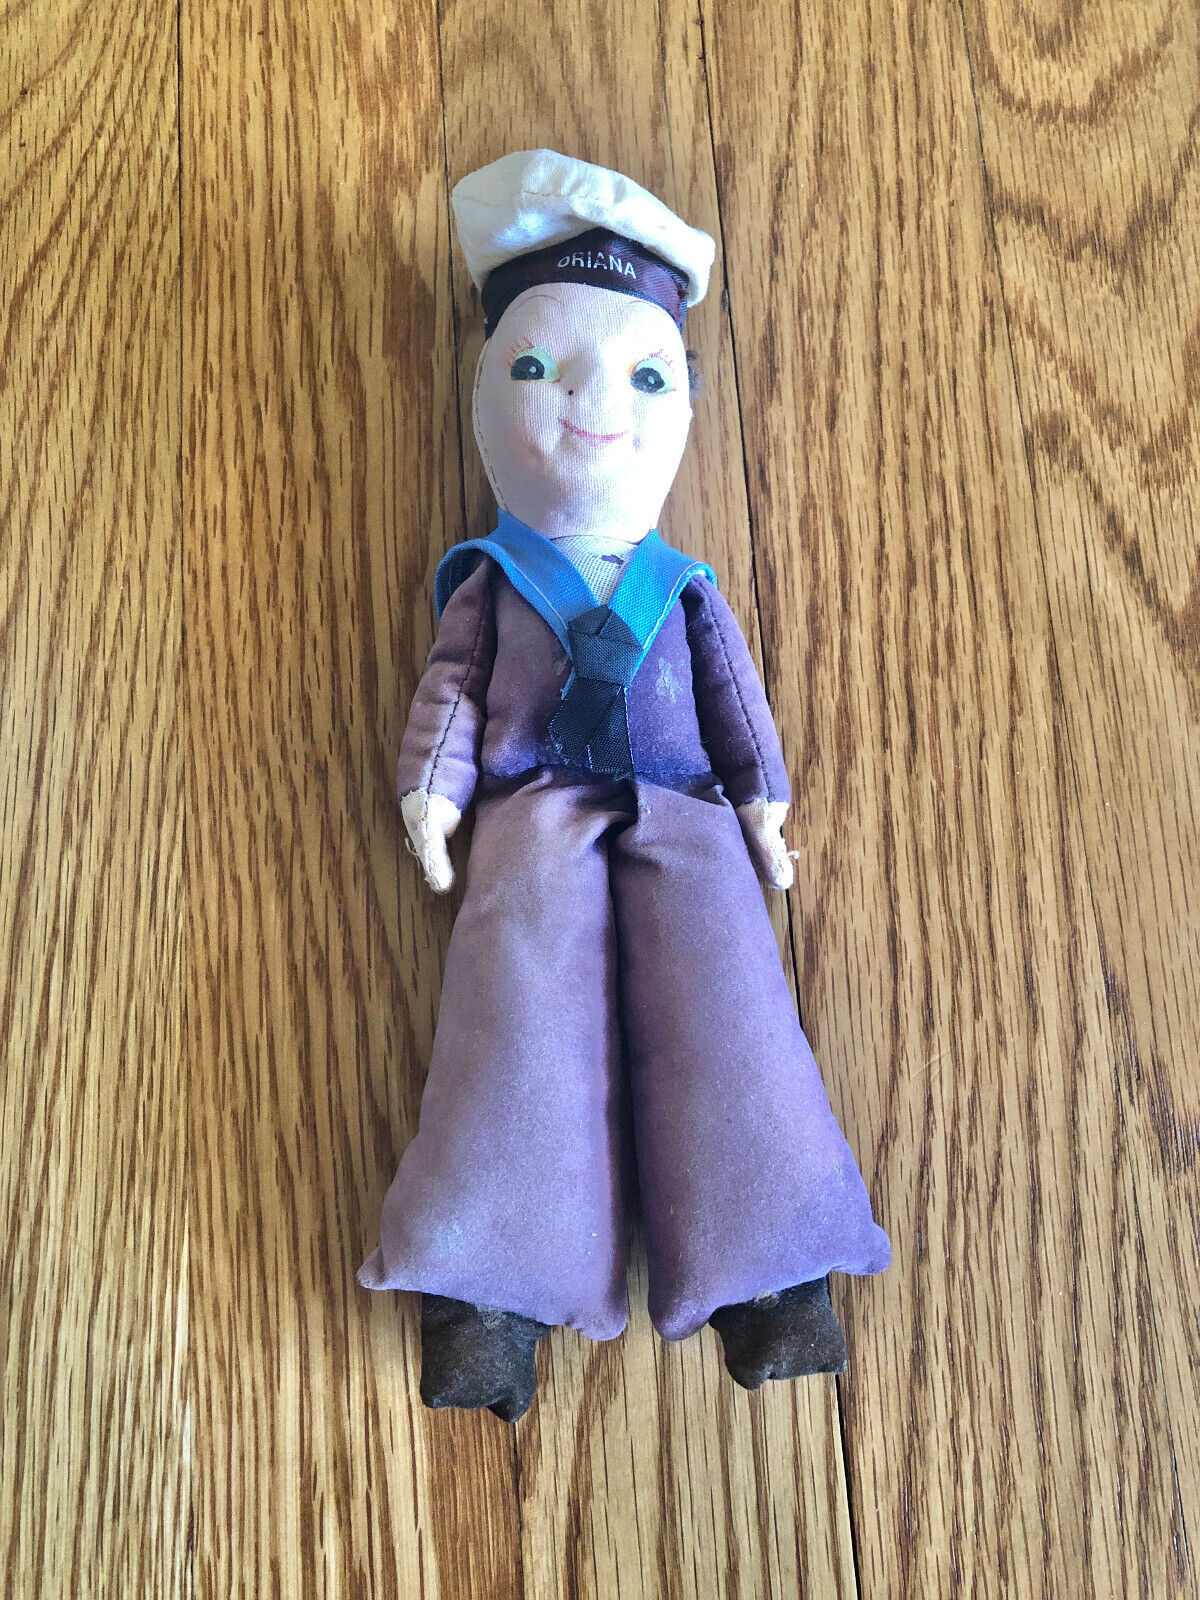 ss Oriana Nora Wellings Sailor Doll / P&O Orient Lines